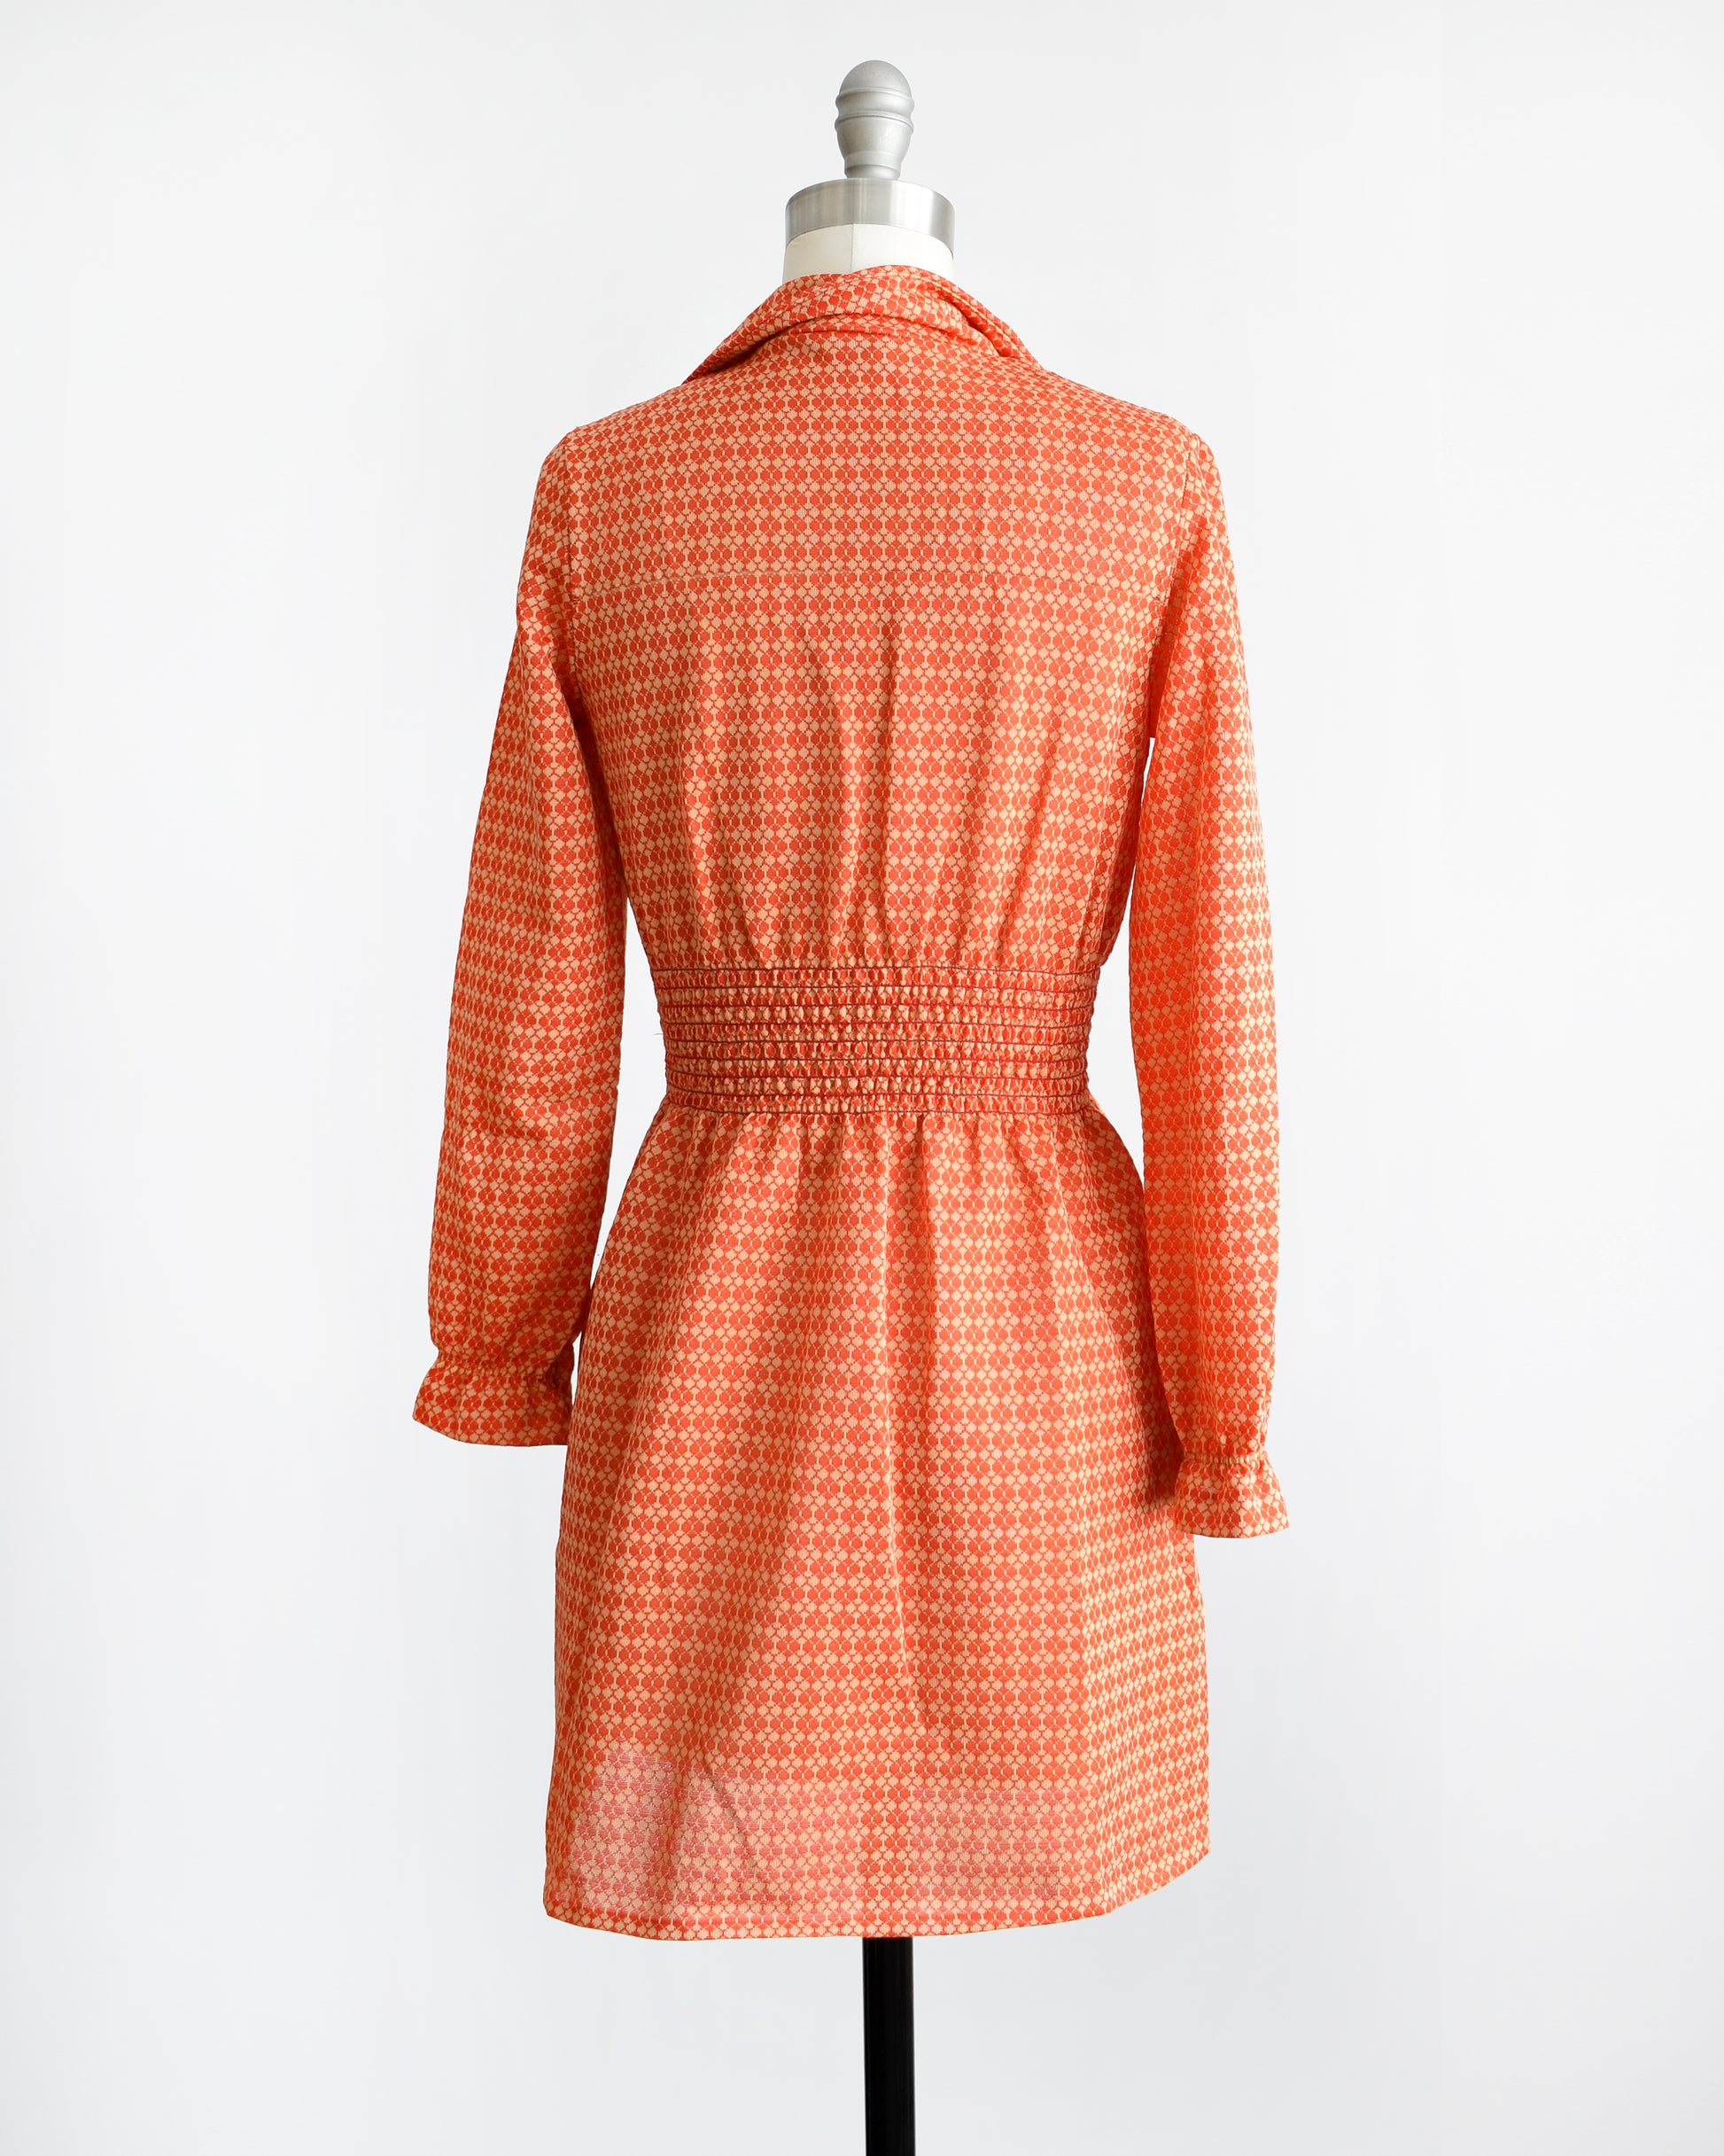 Back view of a vintage late 1960s early 1970s orange long sleeve mod mini dress with button front. 